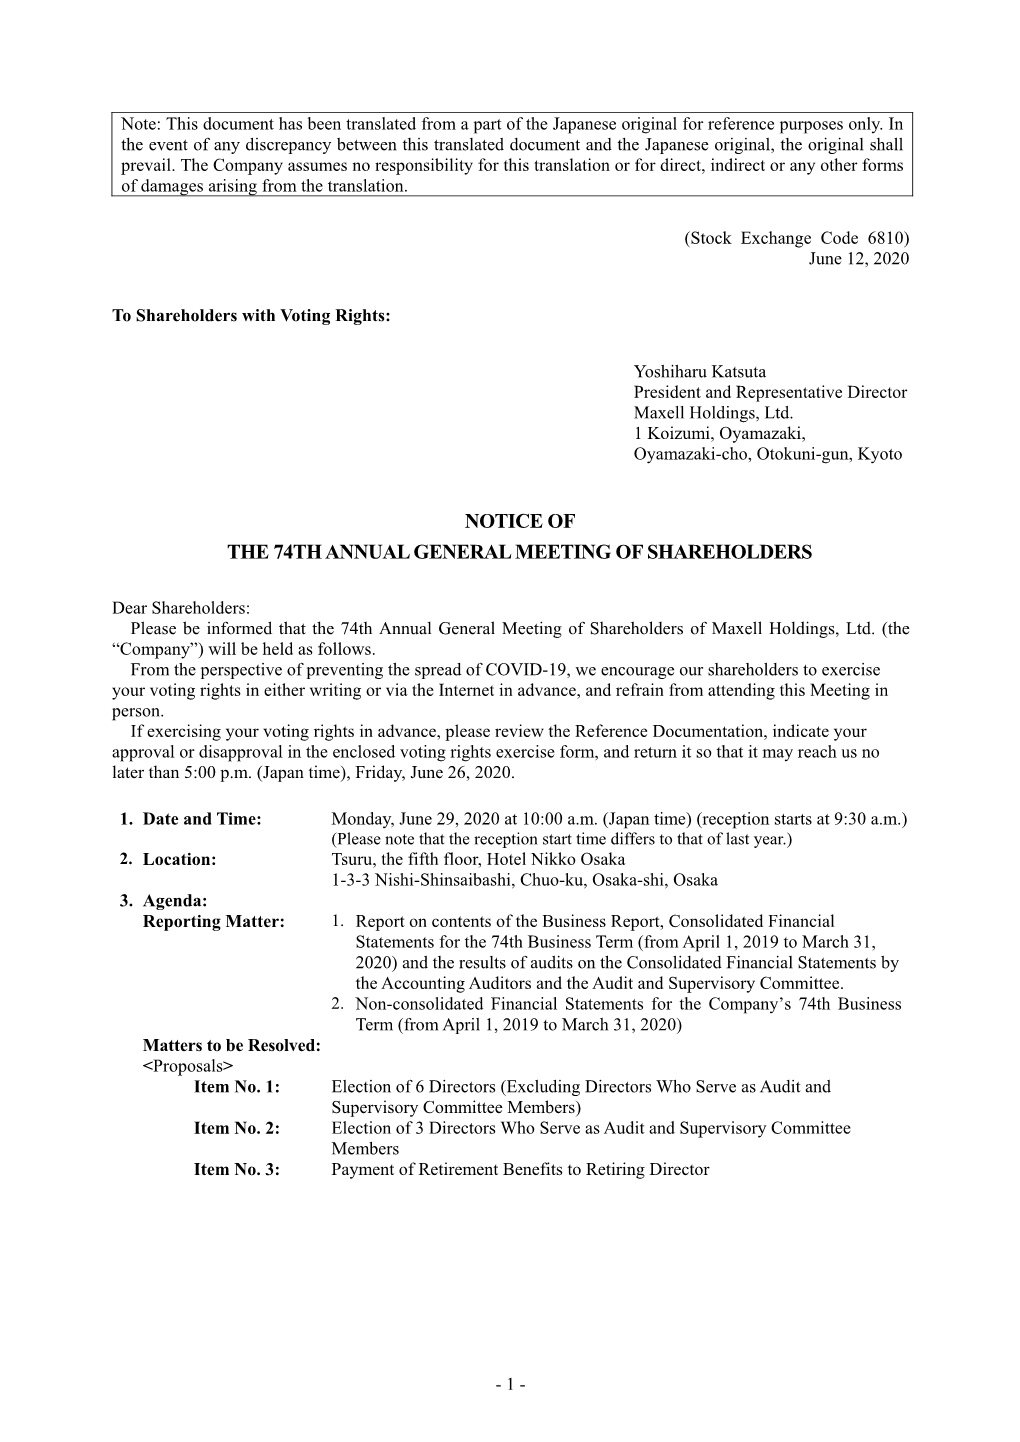 Notice of the 74Th Annual General Meeting of Shareholders